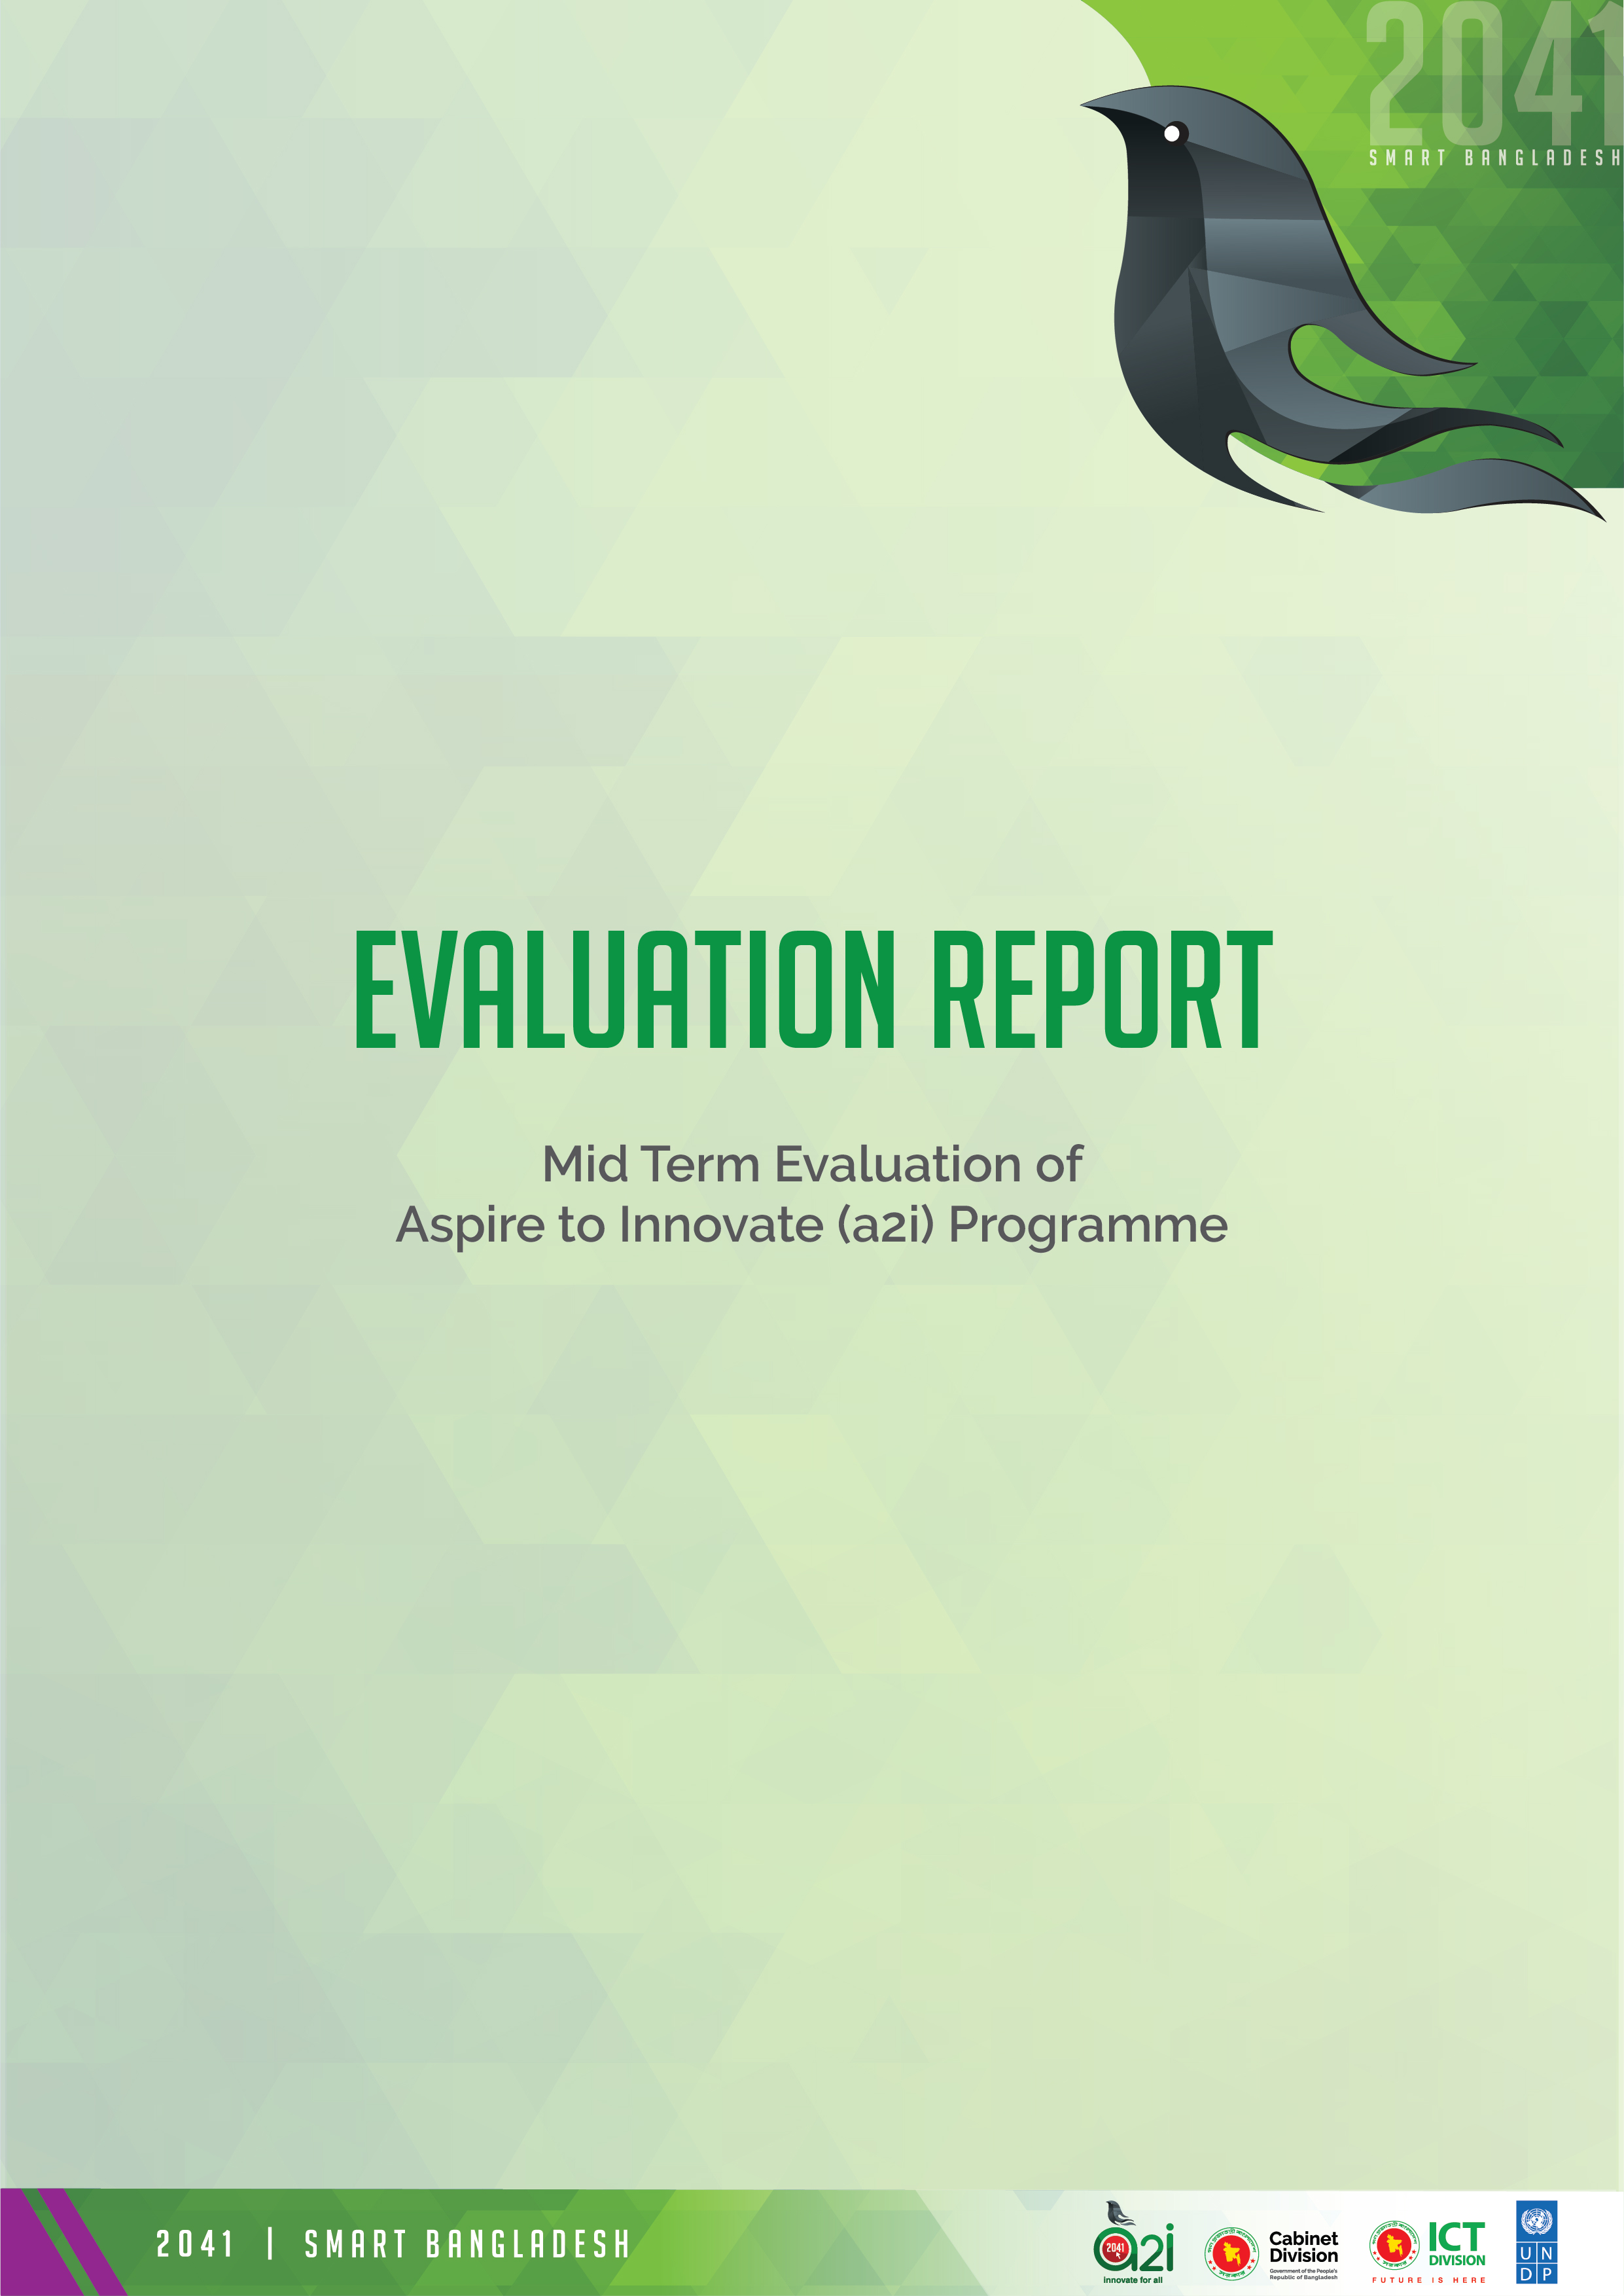 Mid-Term Evaluation: Aspire to Innovate (a2i) Programme